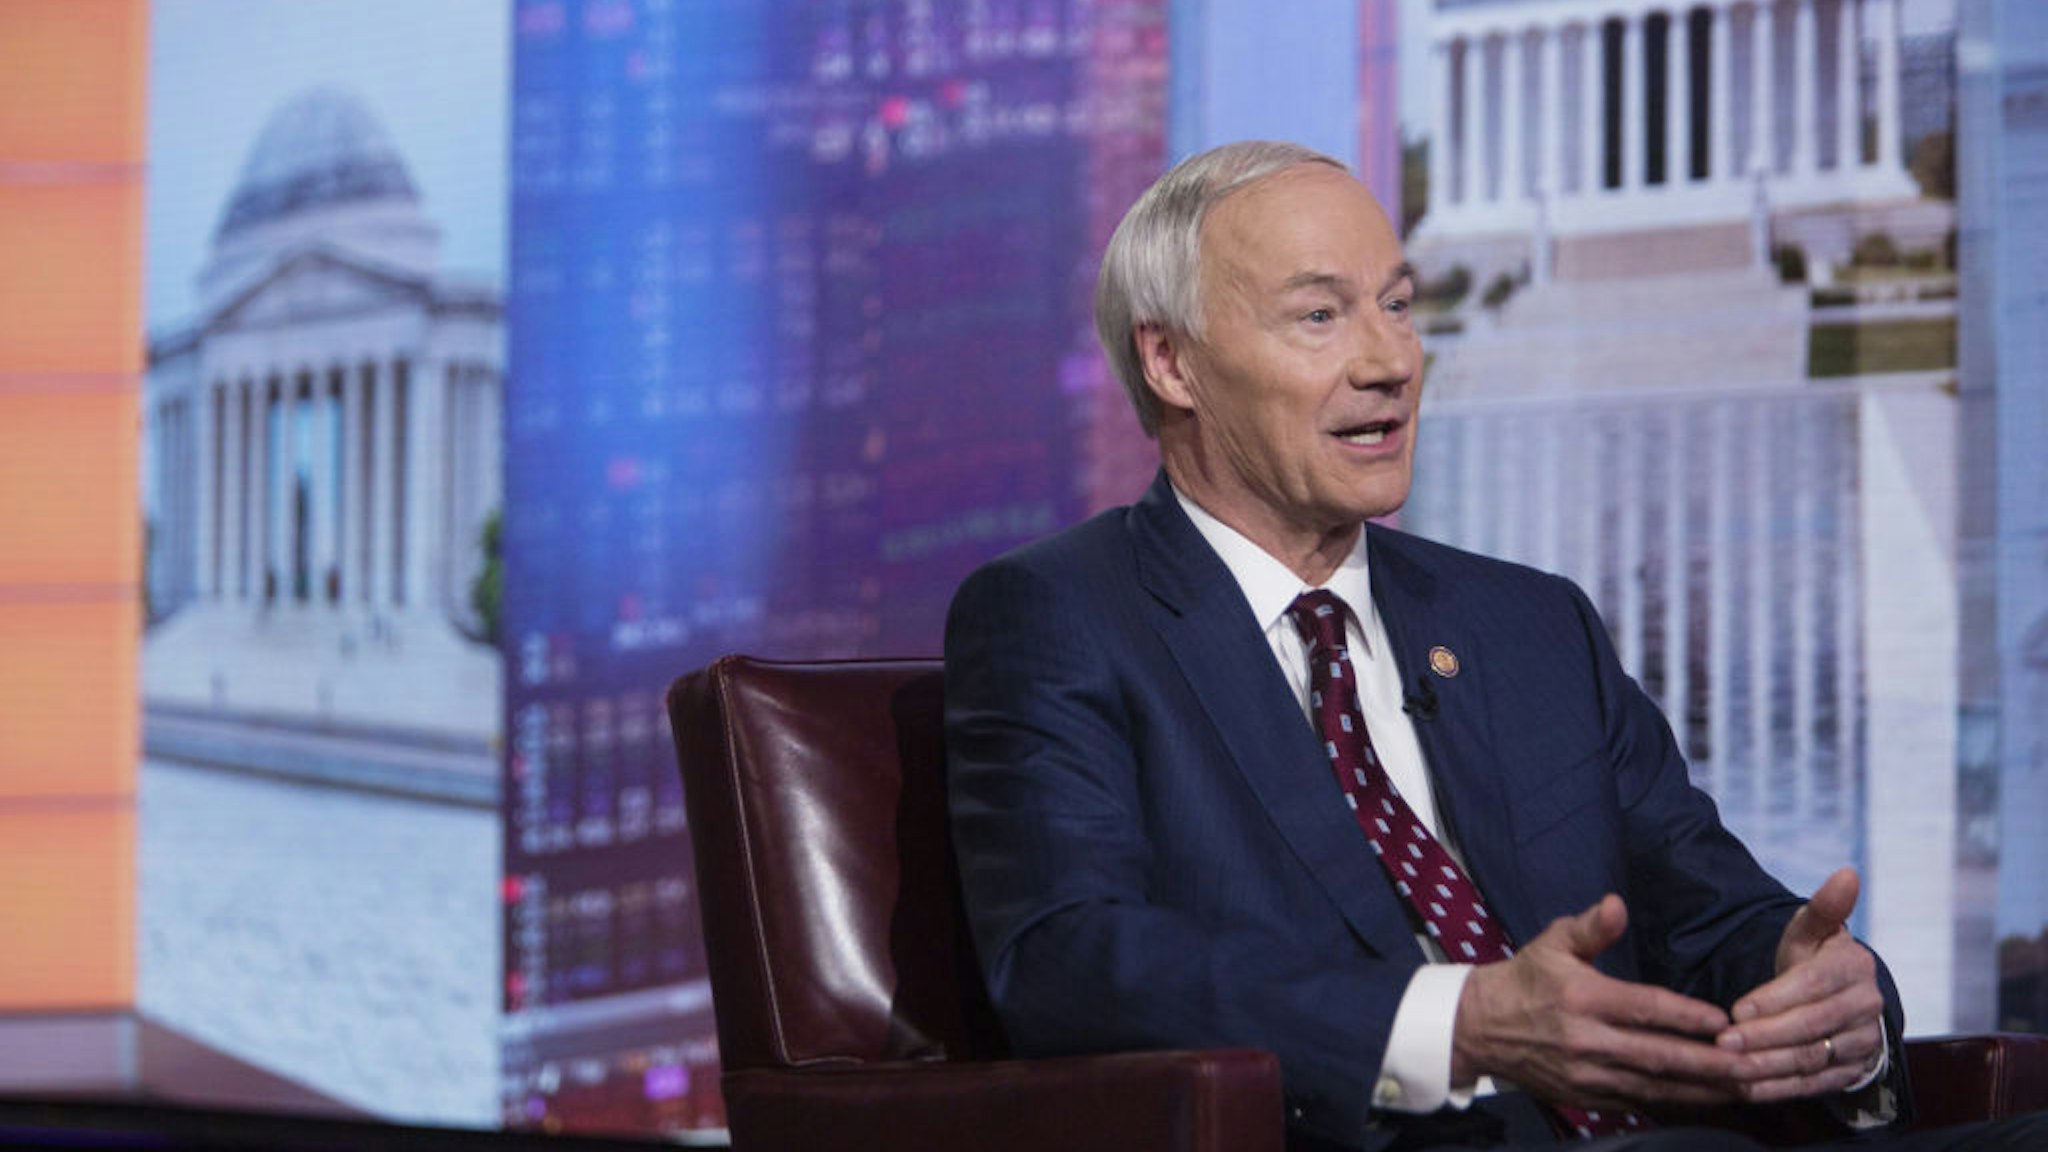 Asa Hutchinson, governor of Arkansas, speaks during a Bloomberg Television interview in New York, U.S., on Tuesday, May 28, 2019. Hutchinson discussed what Arkansas is doing to brace for more severe flooding in the state.